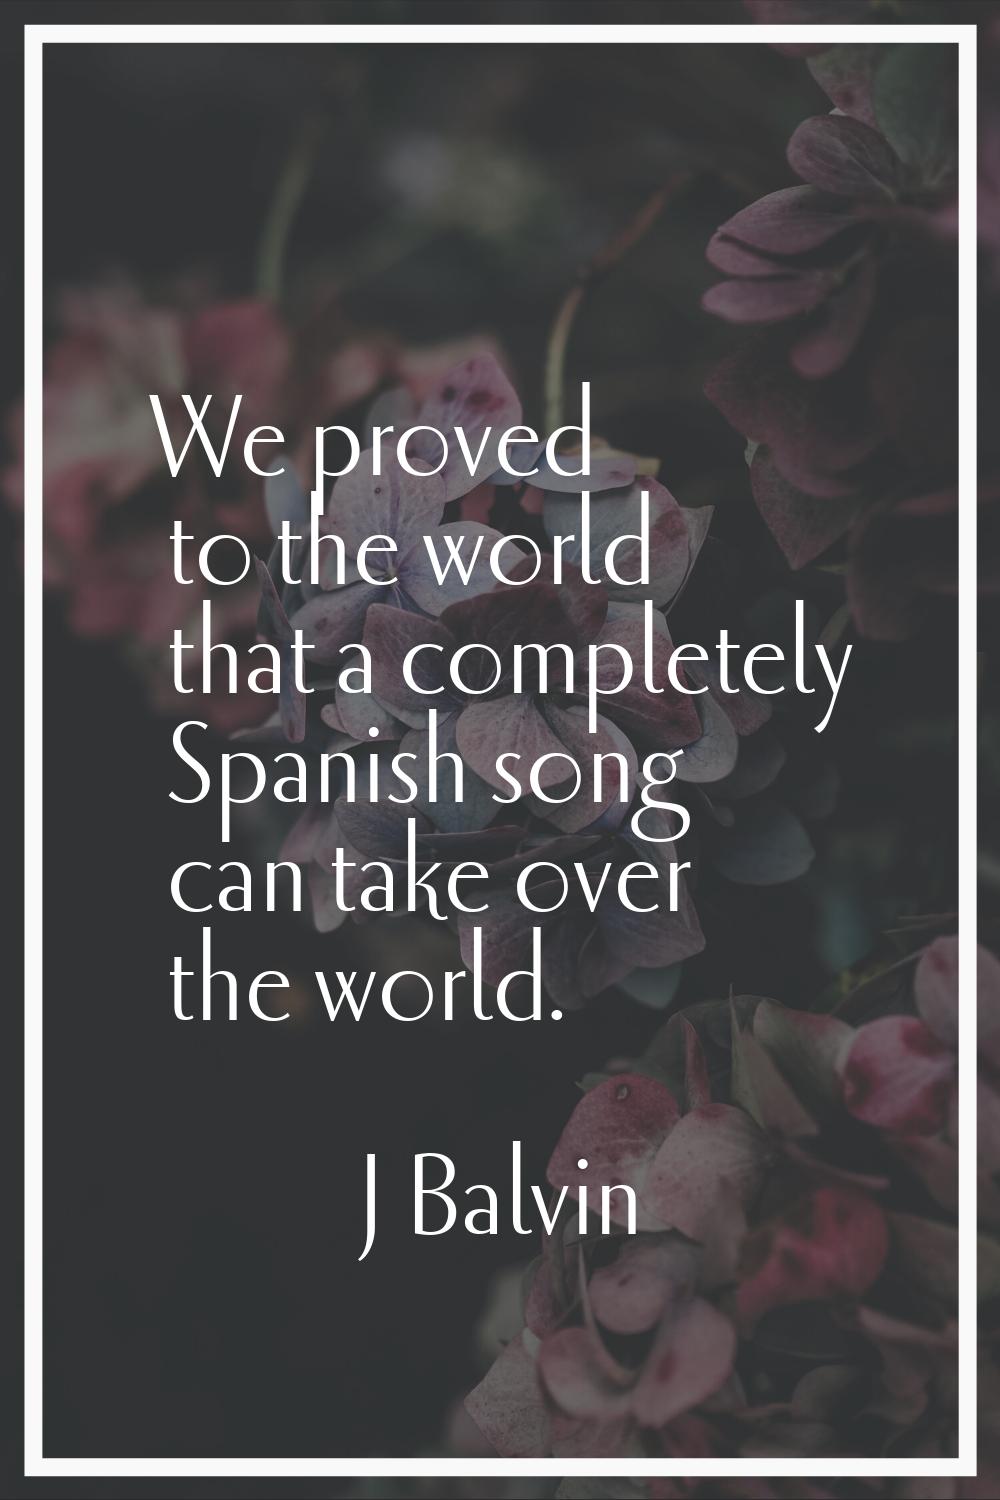 We proved to the world that a completely Spanish song can take over the world.